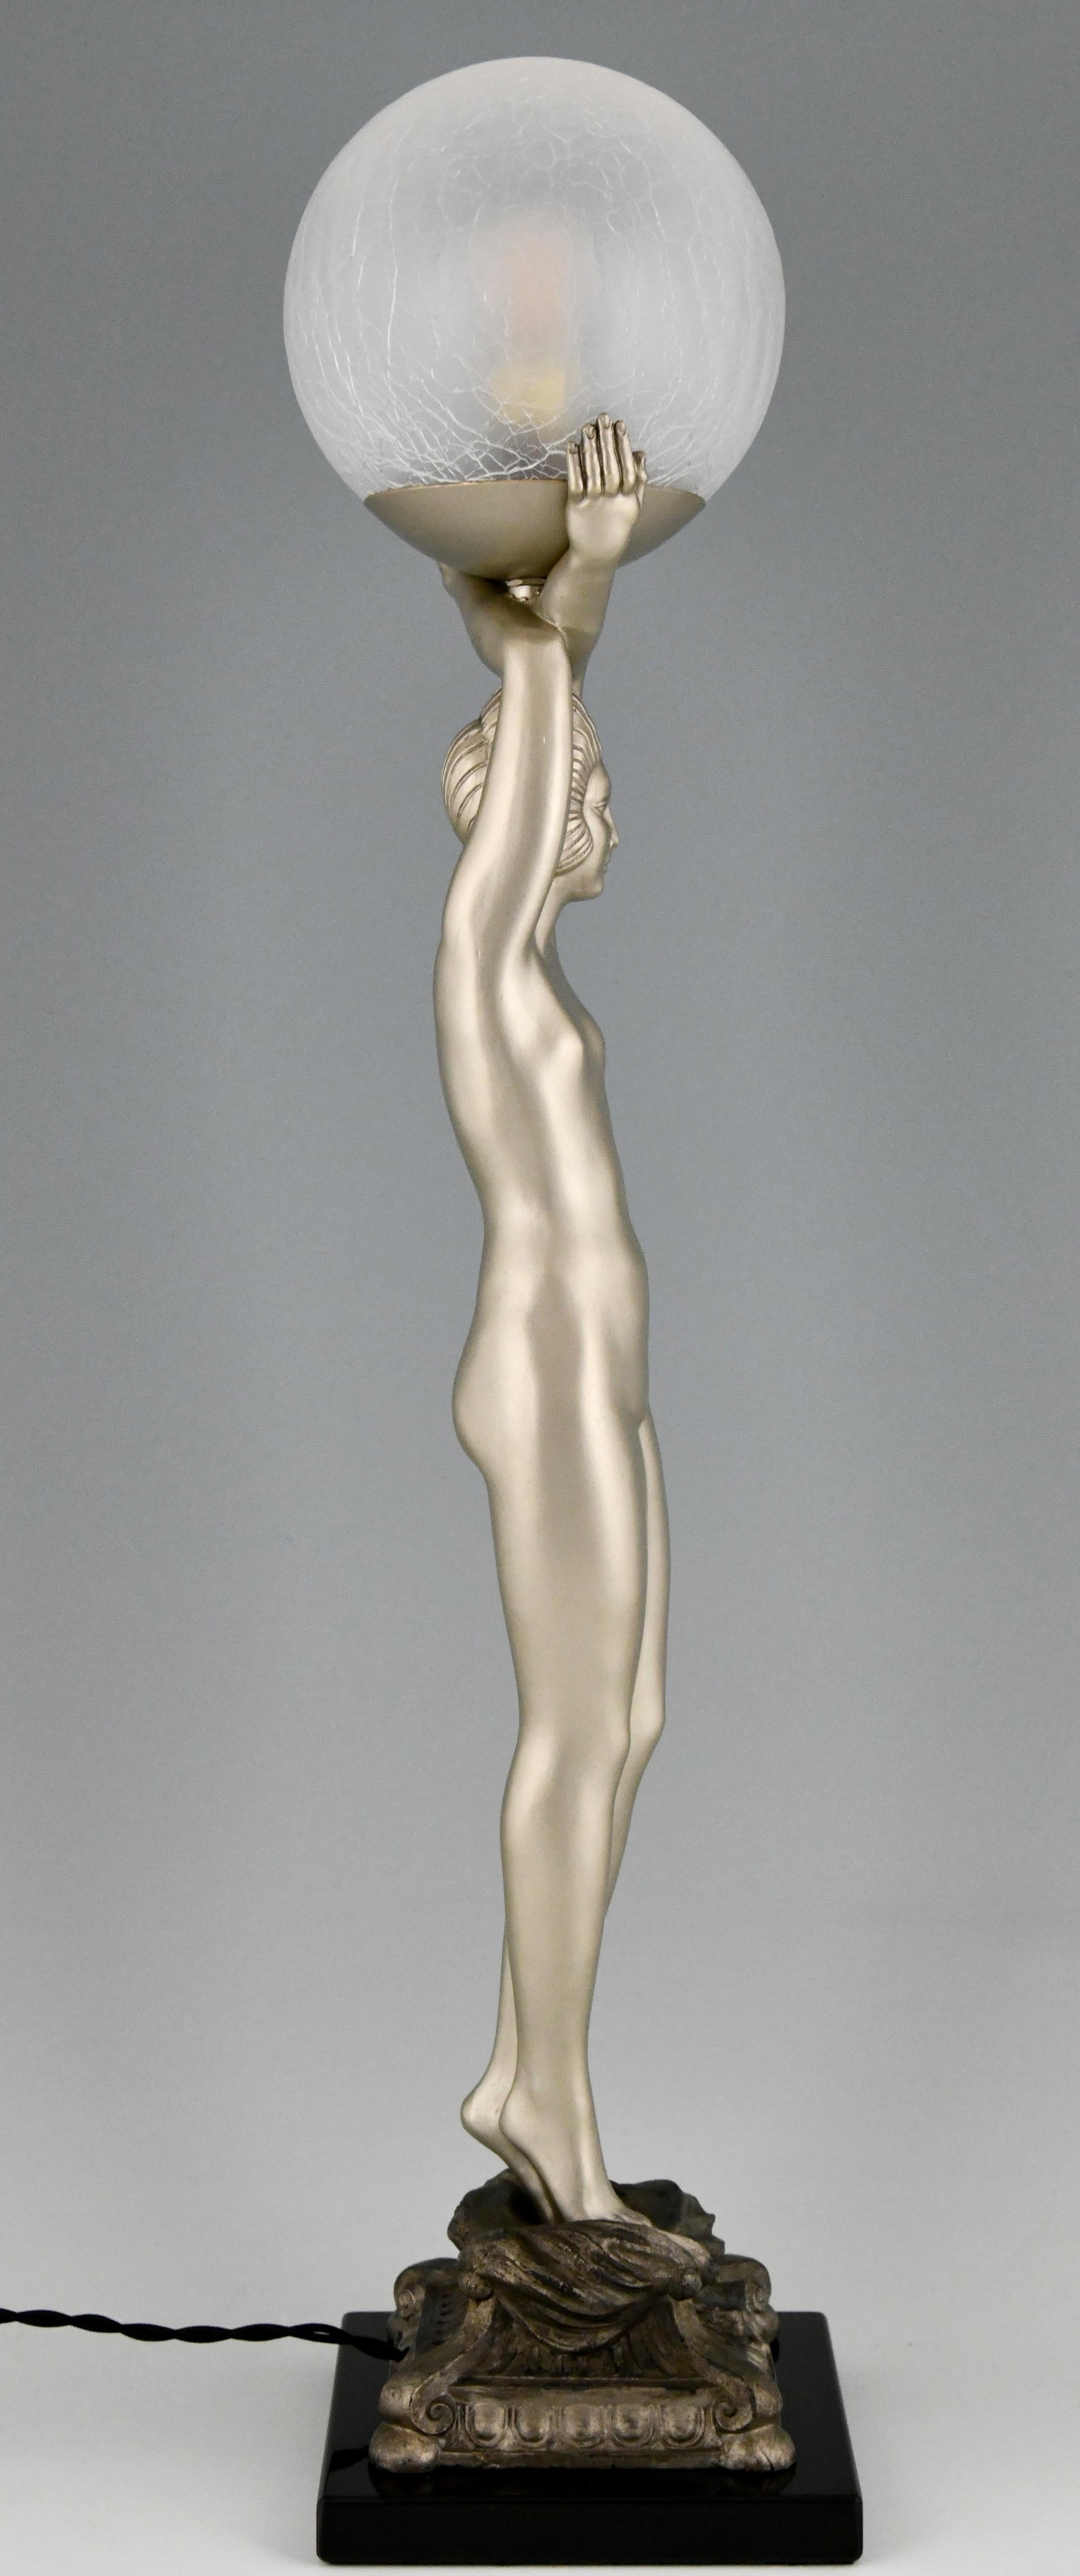 20th Century Art Deco Style Lamp Standing Nude with Globe Pierre Le Faguays